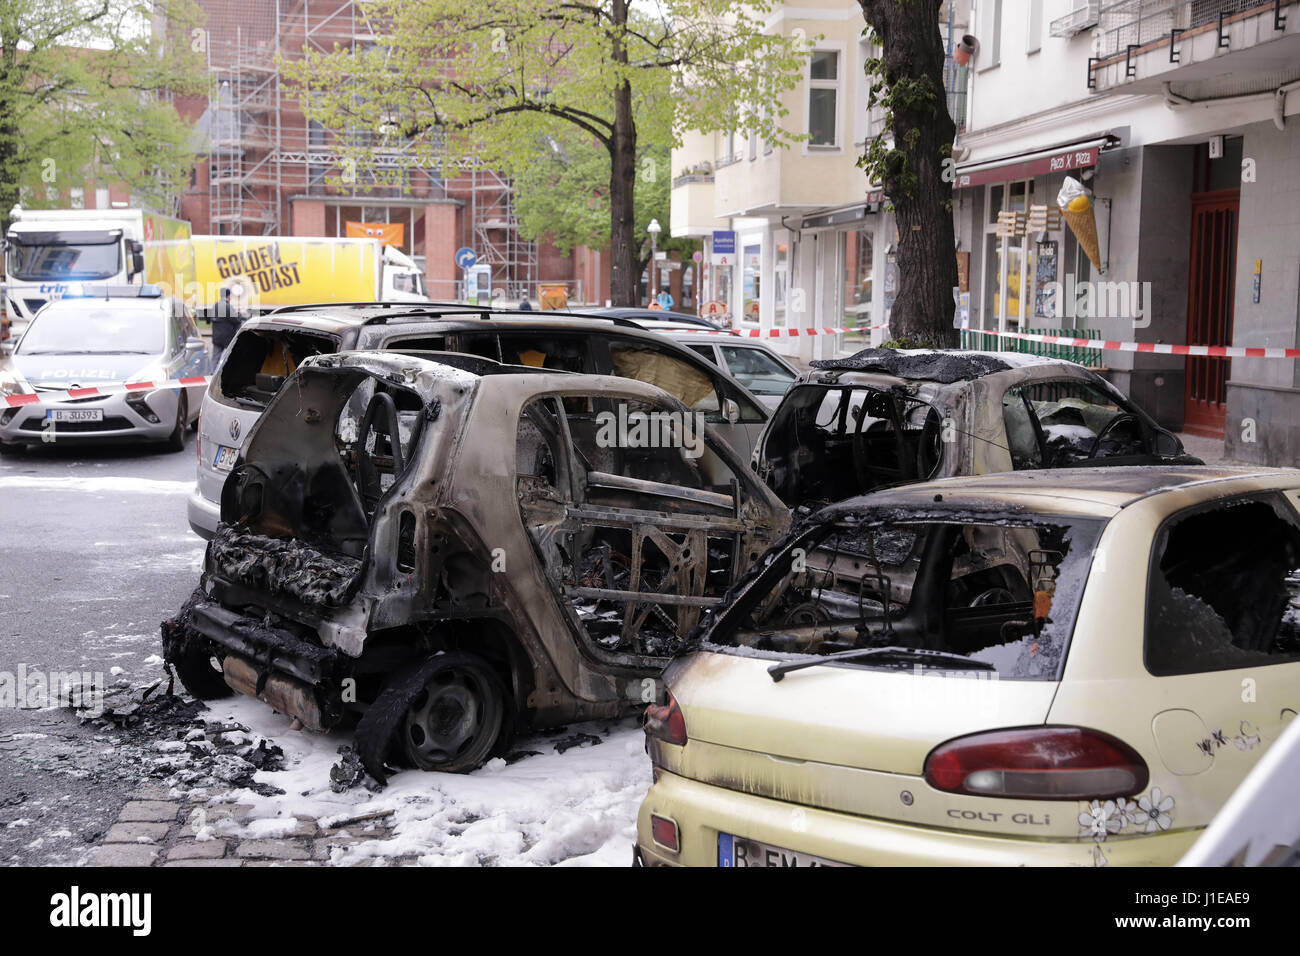 Berlin, Germany. 21st Apr, 2017. Burnt-out cars in a street in the borough of Neukoelln in Berlin, Germany, 21 April 2017. Five cars were engulfed in flames on Thursday night in the city, four of them in Neukoelln, according to a police statement. The vehicles were completely destroyed in the fire. Two of them belonged to a local restaurant. Photo: Jörg Carstensen/dpa/Alamy Live News Stock Photo